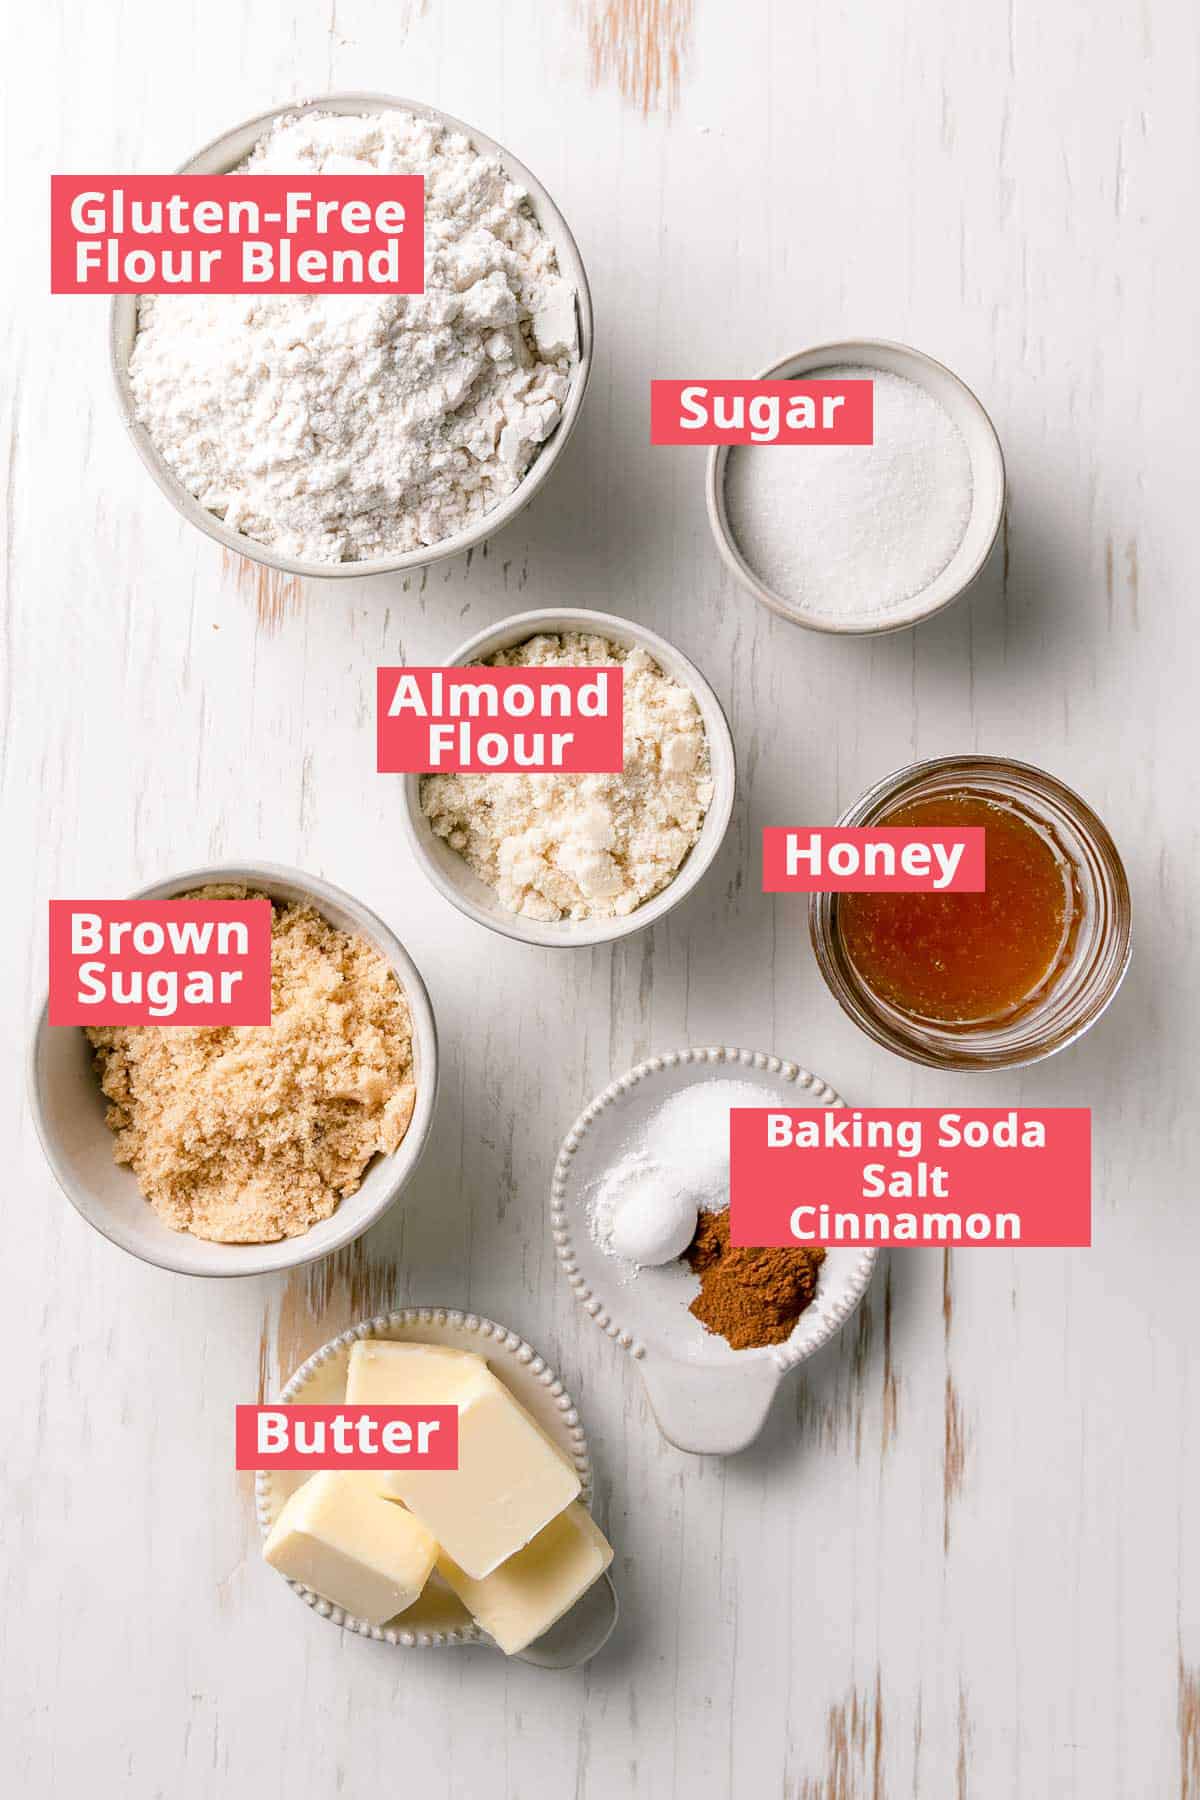 Ingredients for the recipe measured out in bowls including honey, almond flour, sugars, and butter.